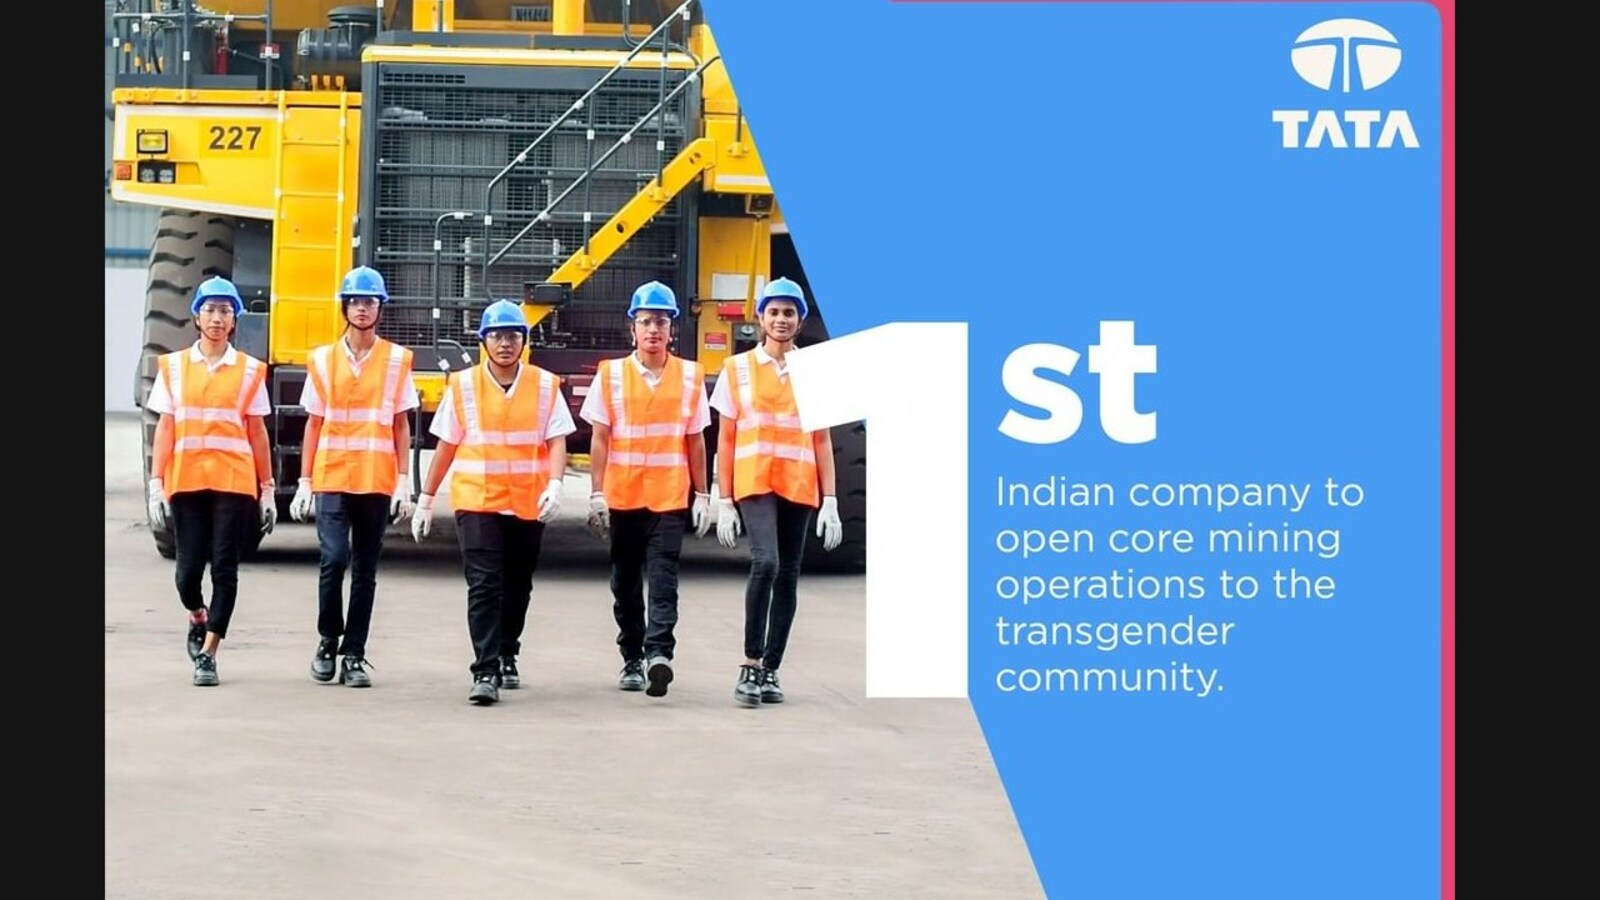 Tata Steel receives Safety & Health Recognition 2021 from World Steel  Association – The People Management